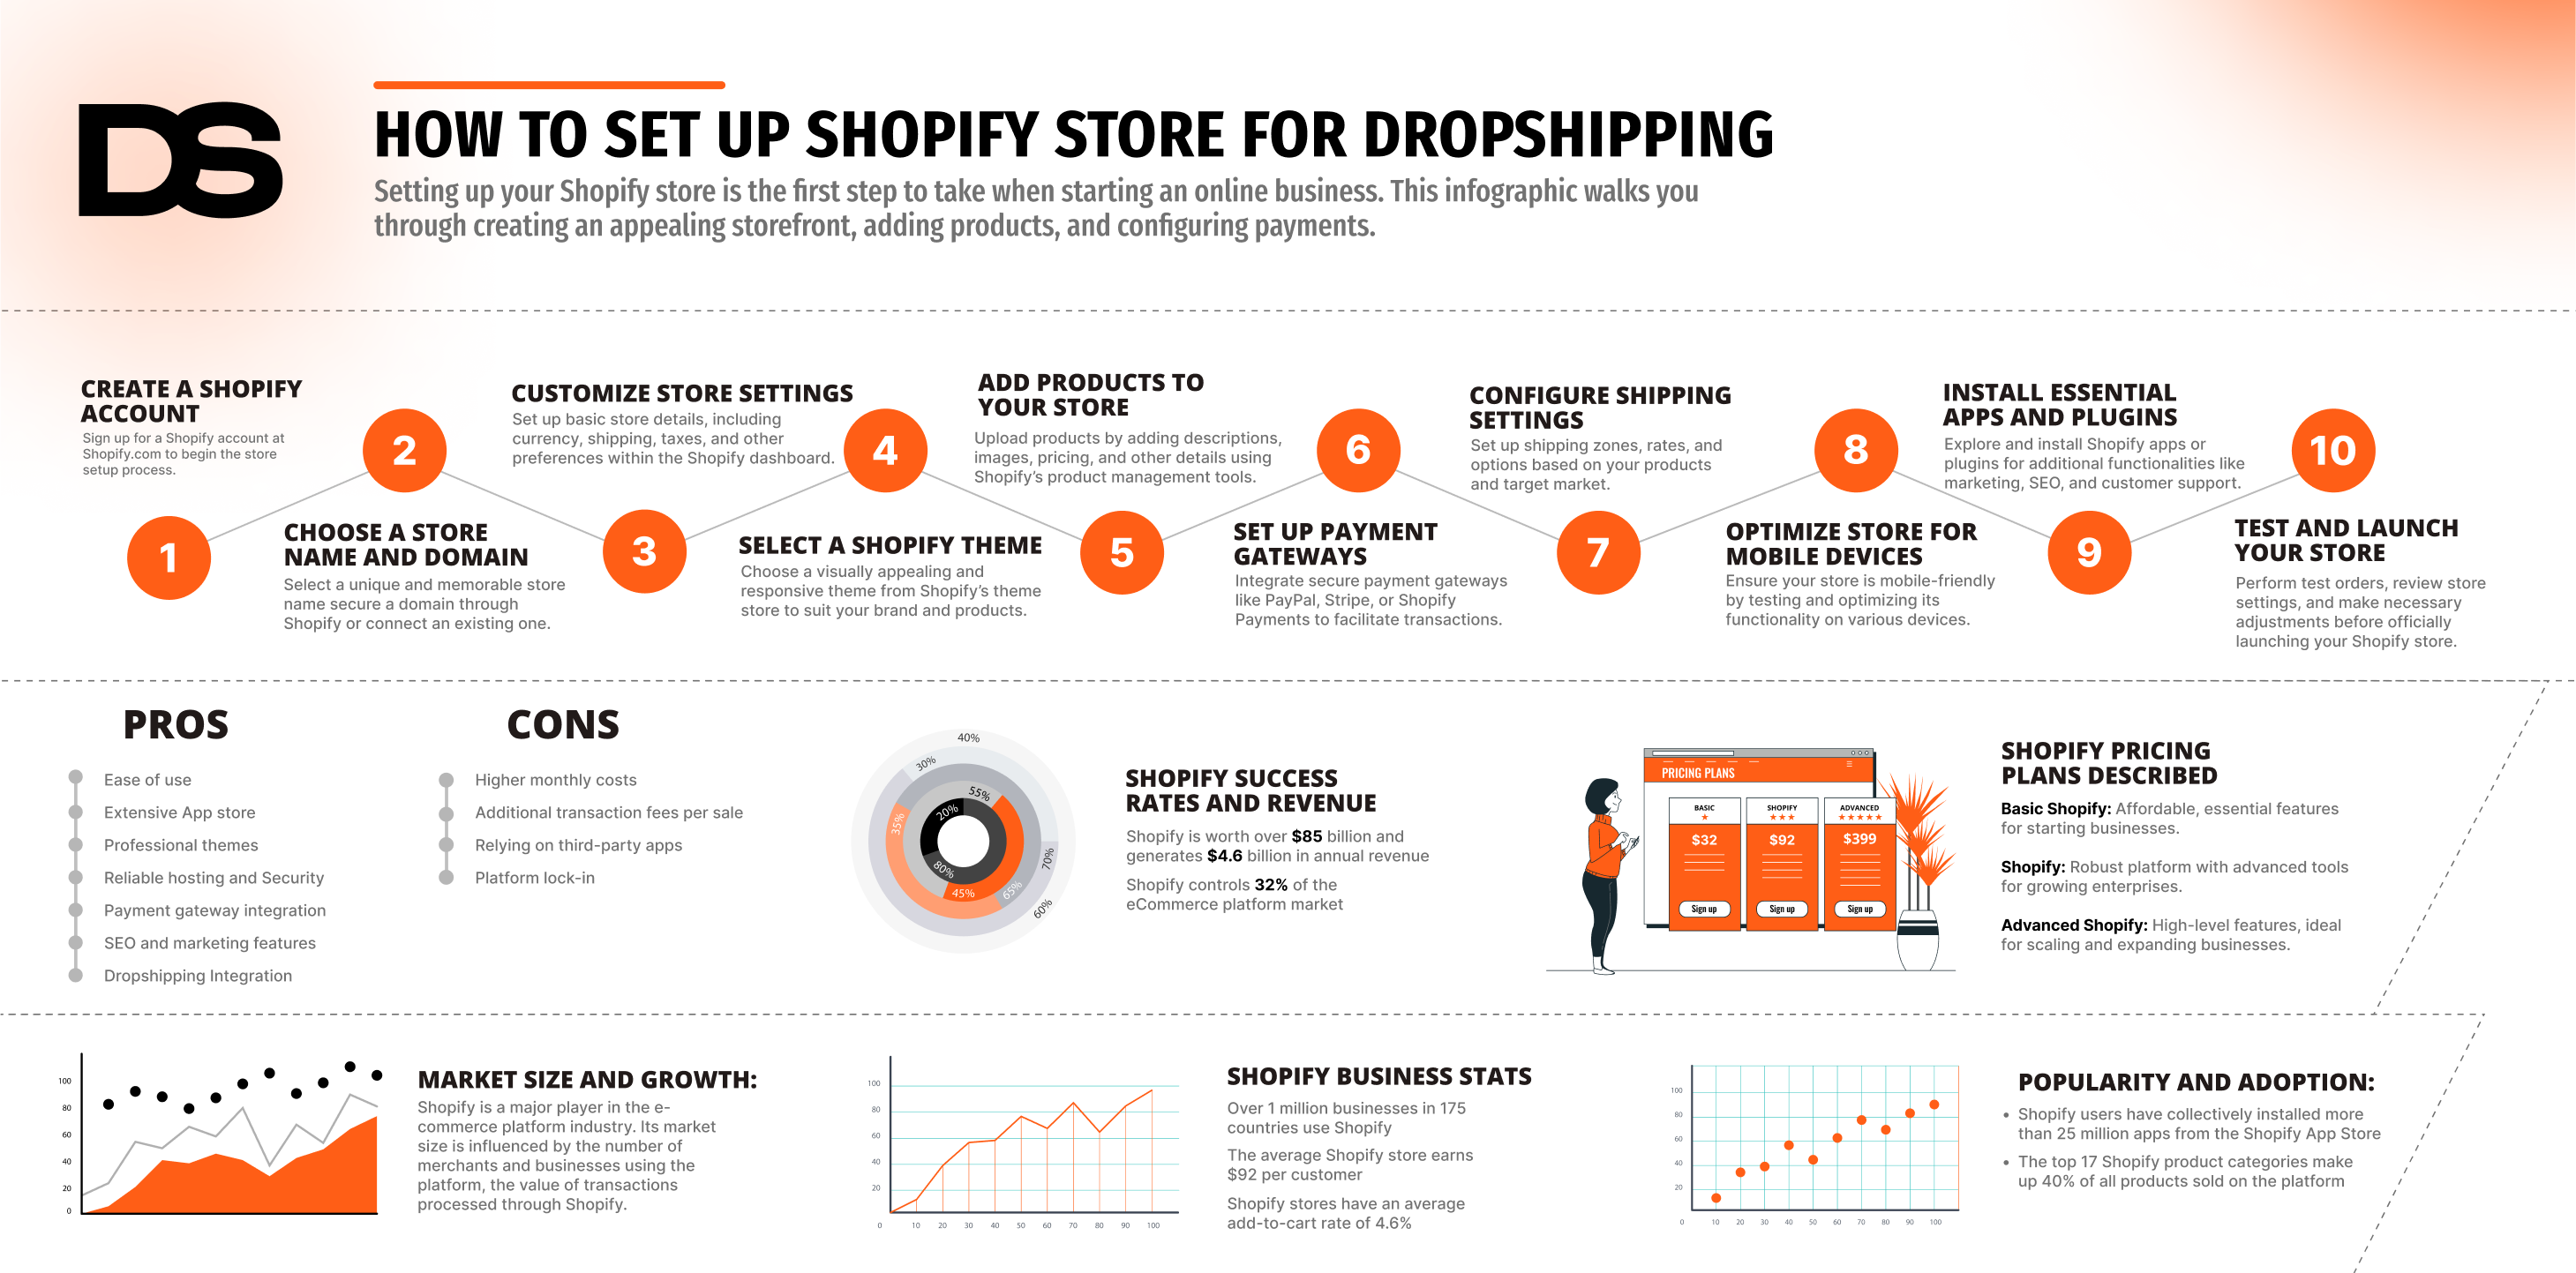 Setting Up Your Shopify Store